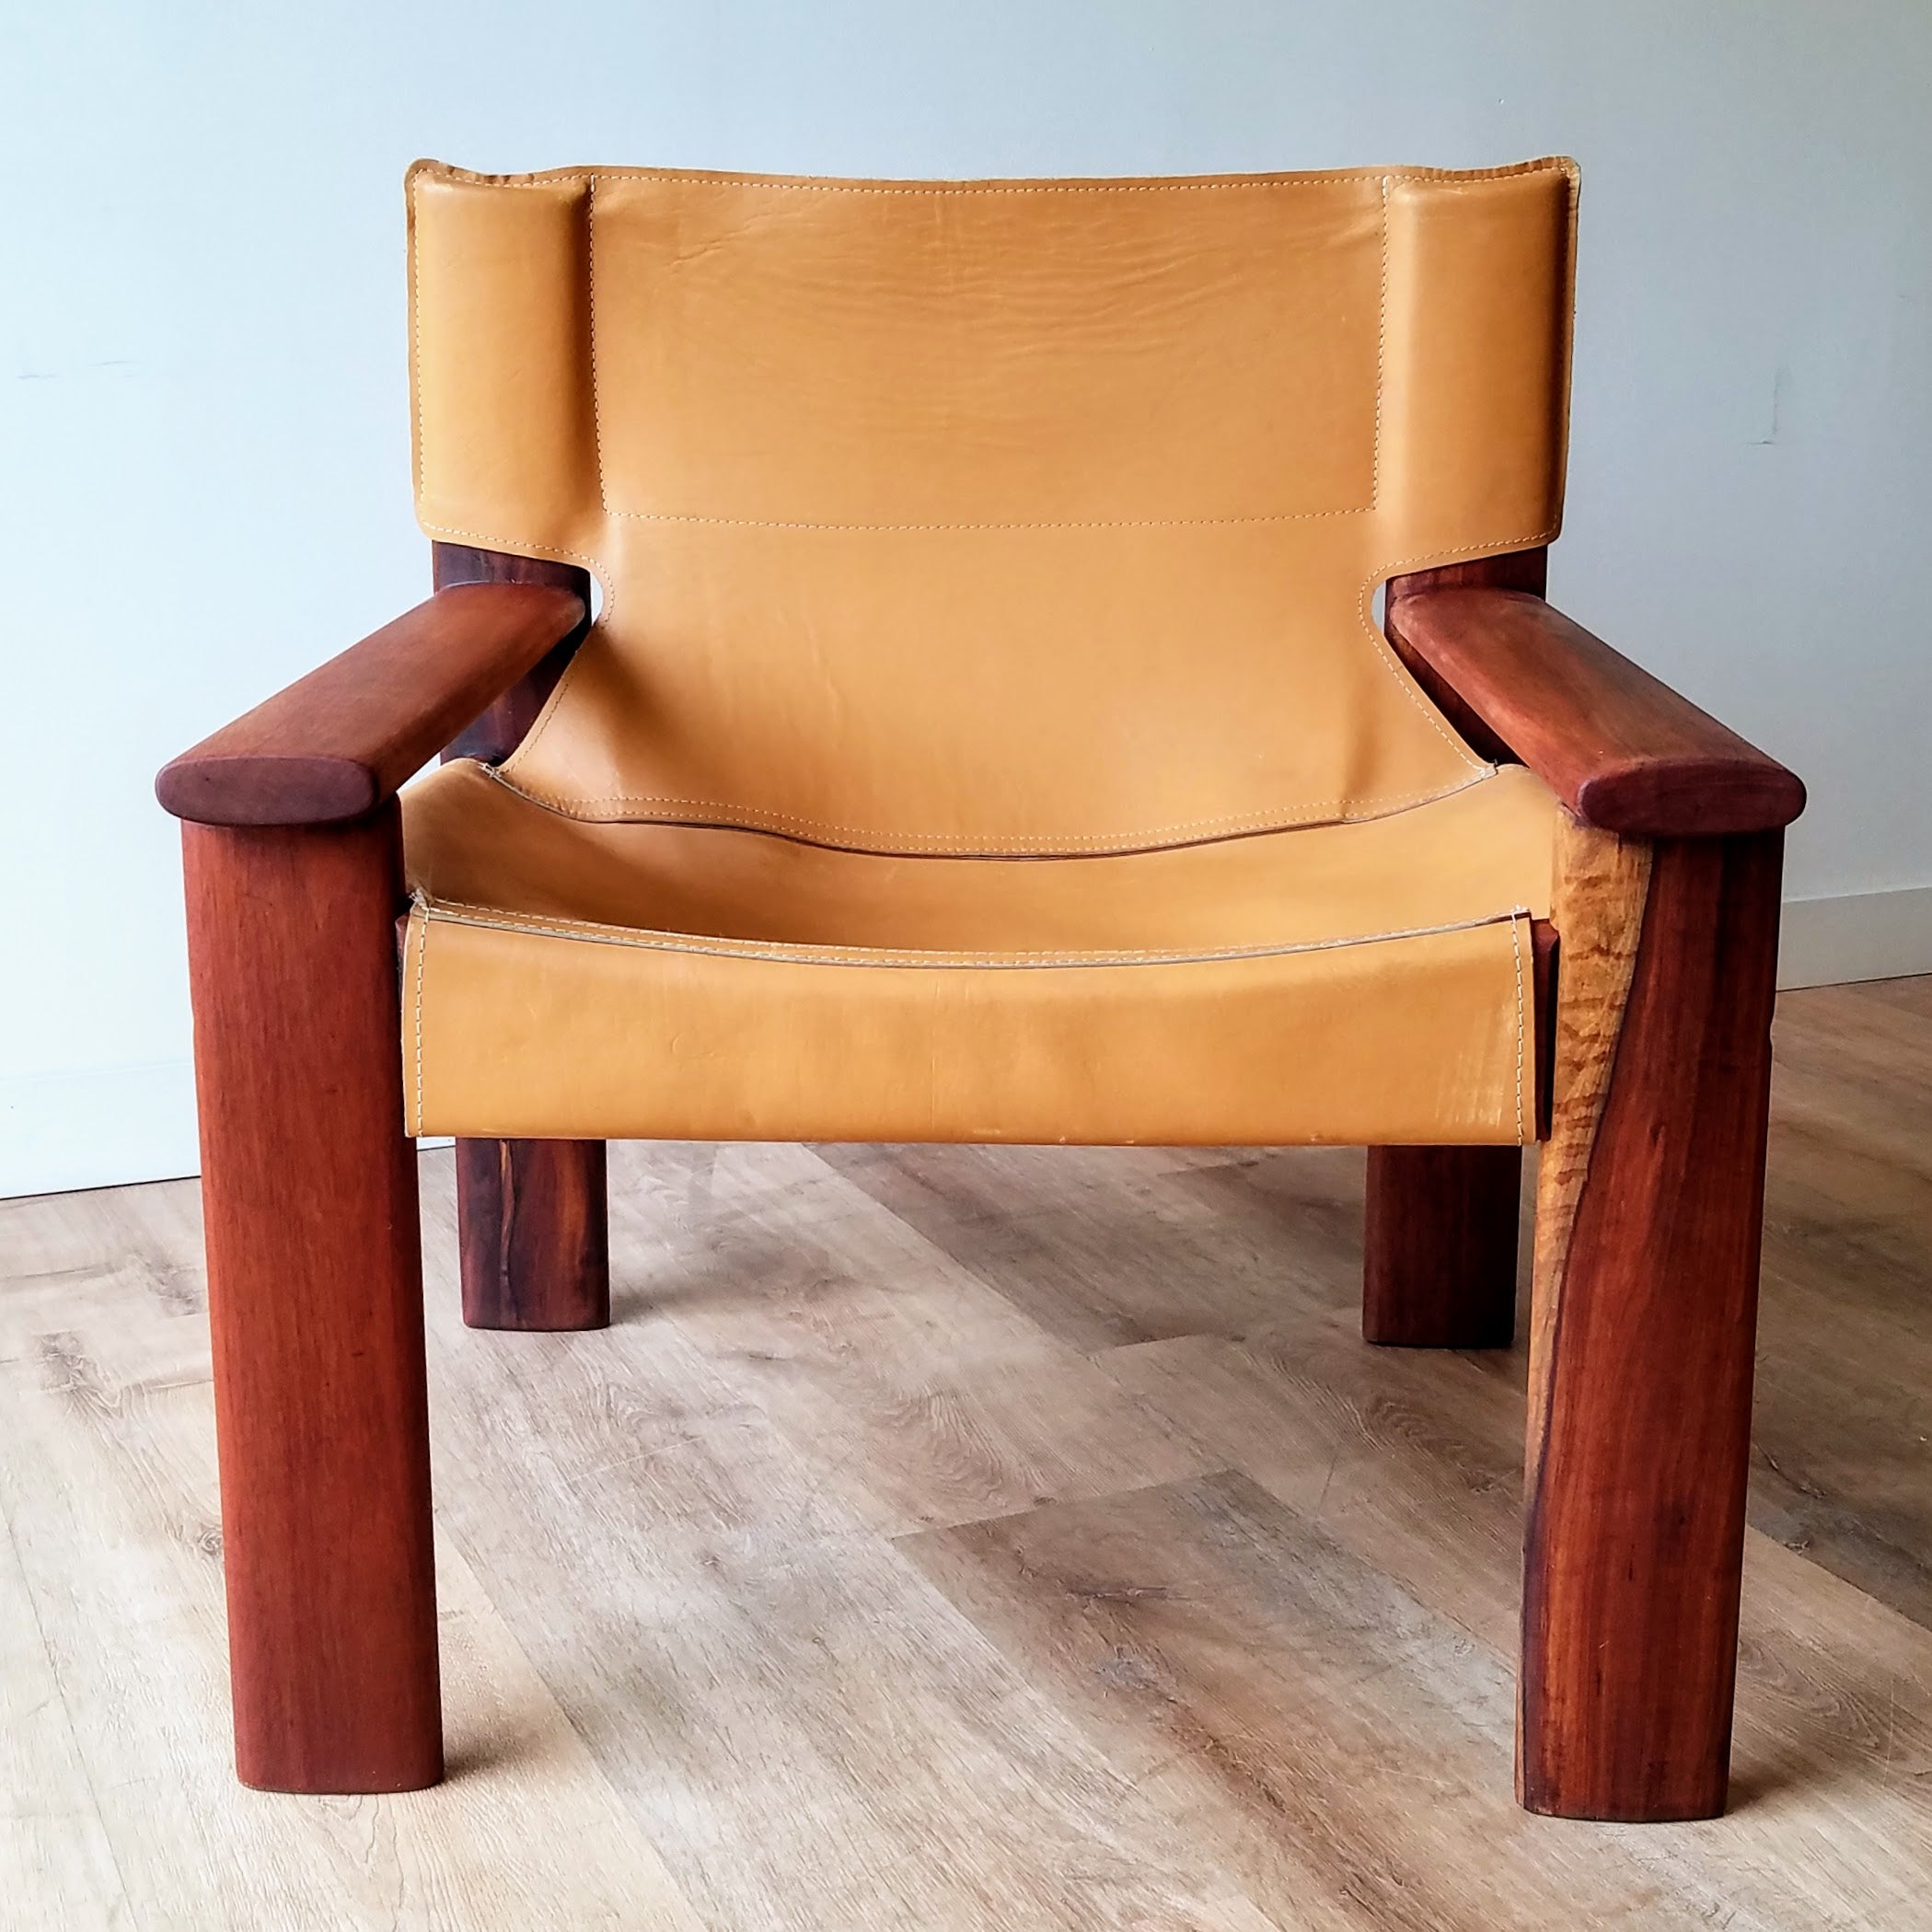 Sergio Rodrigues Lounge Chair